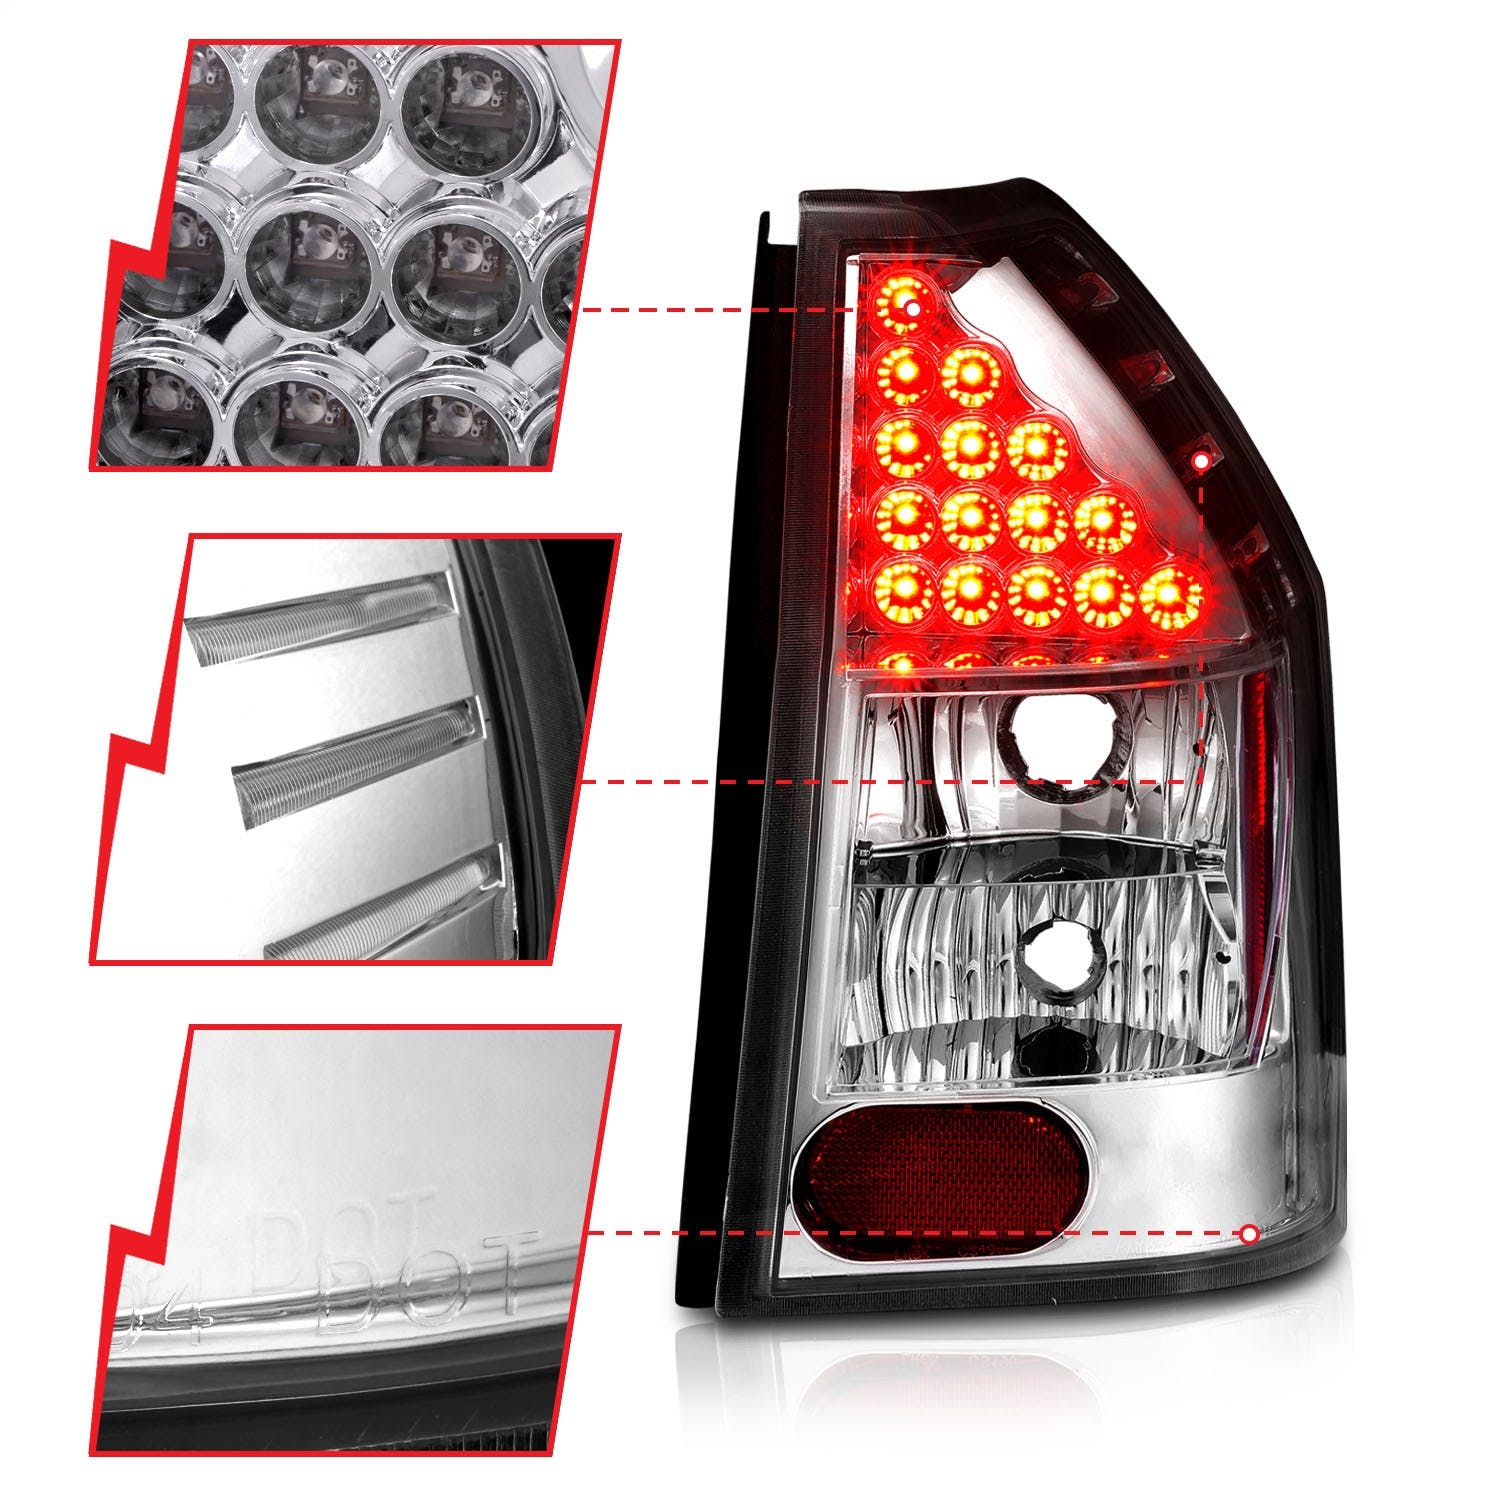 AnzoUSA 321016 LED Taillights Chrome